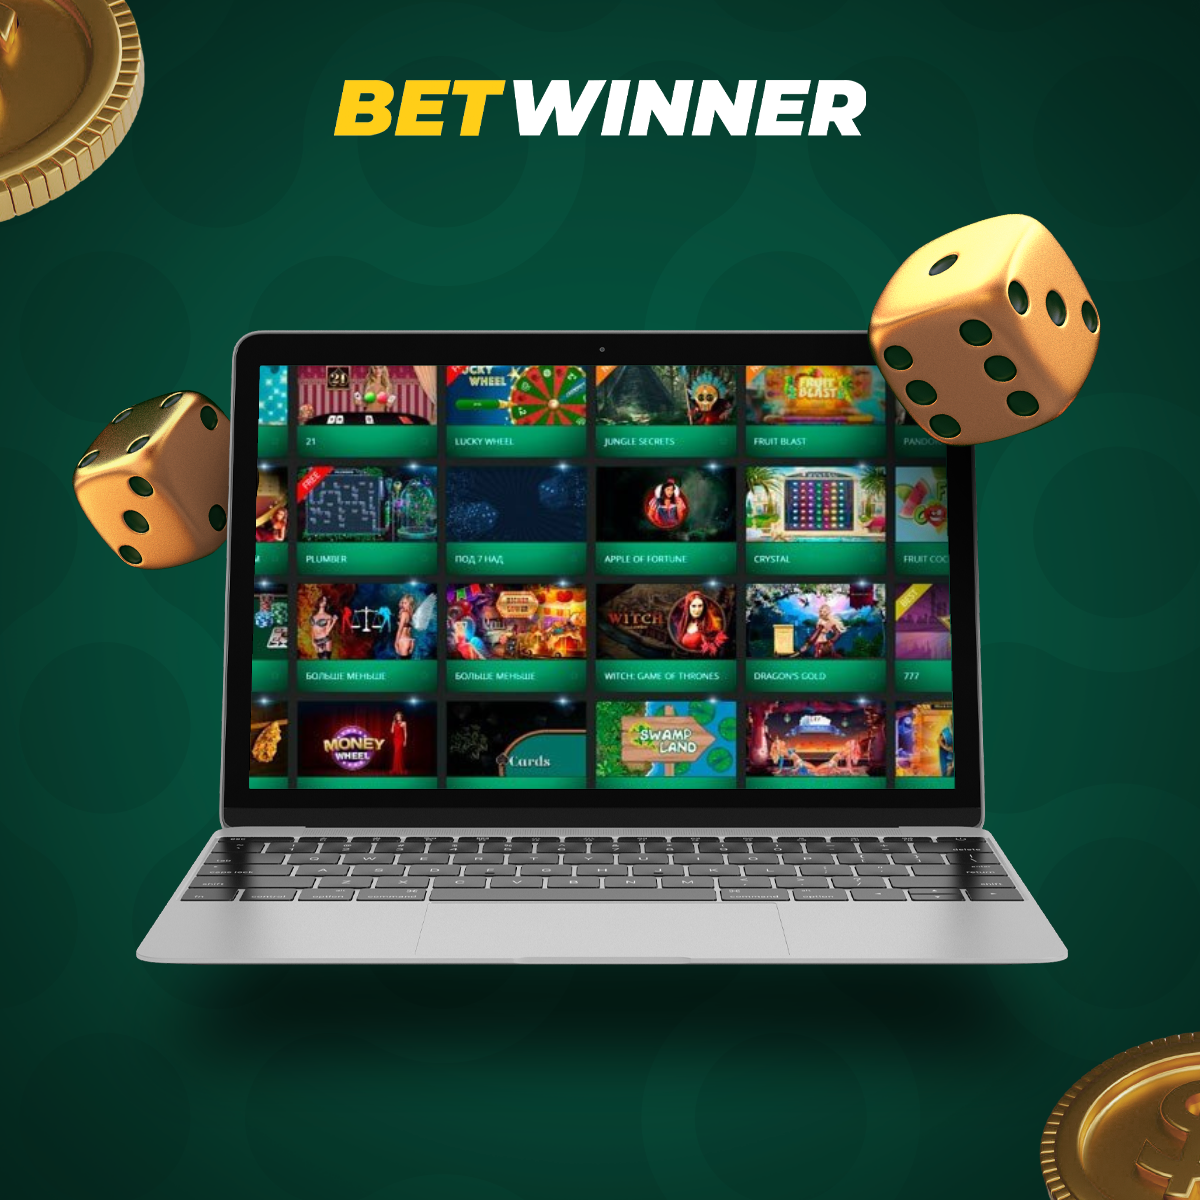 3 More Cool Tools For bet winner affiliates